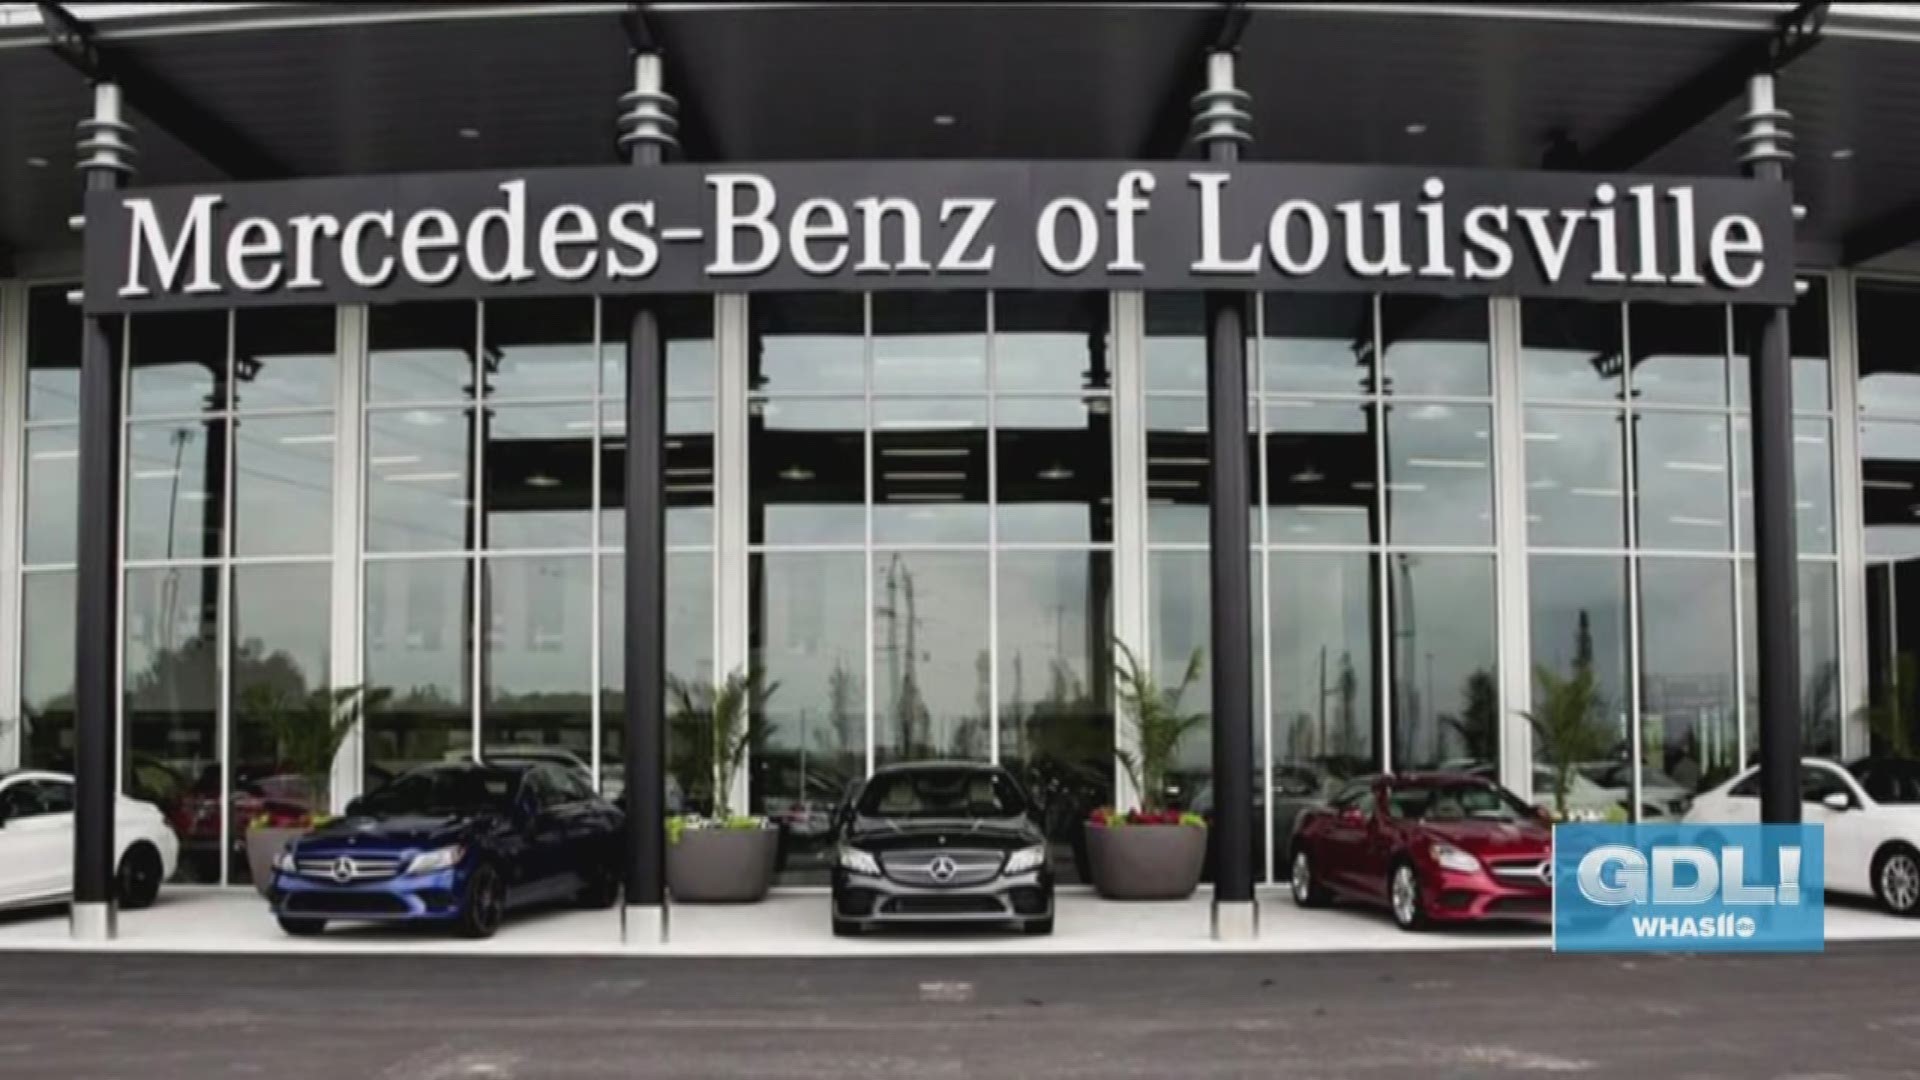 Mercedes-Benz of Louisville is located at 2520 Terra Crossing Boulevard in Louisville, KY. For more information, call 502-565-4410 or go to MBLouisville.com.